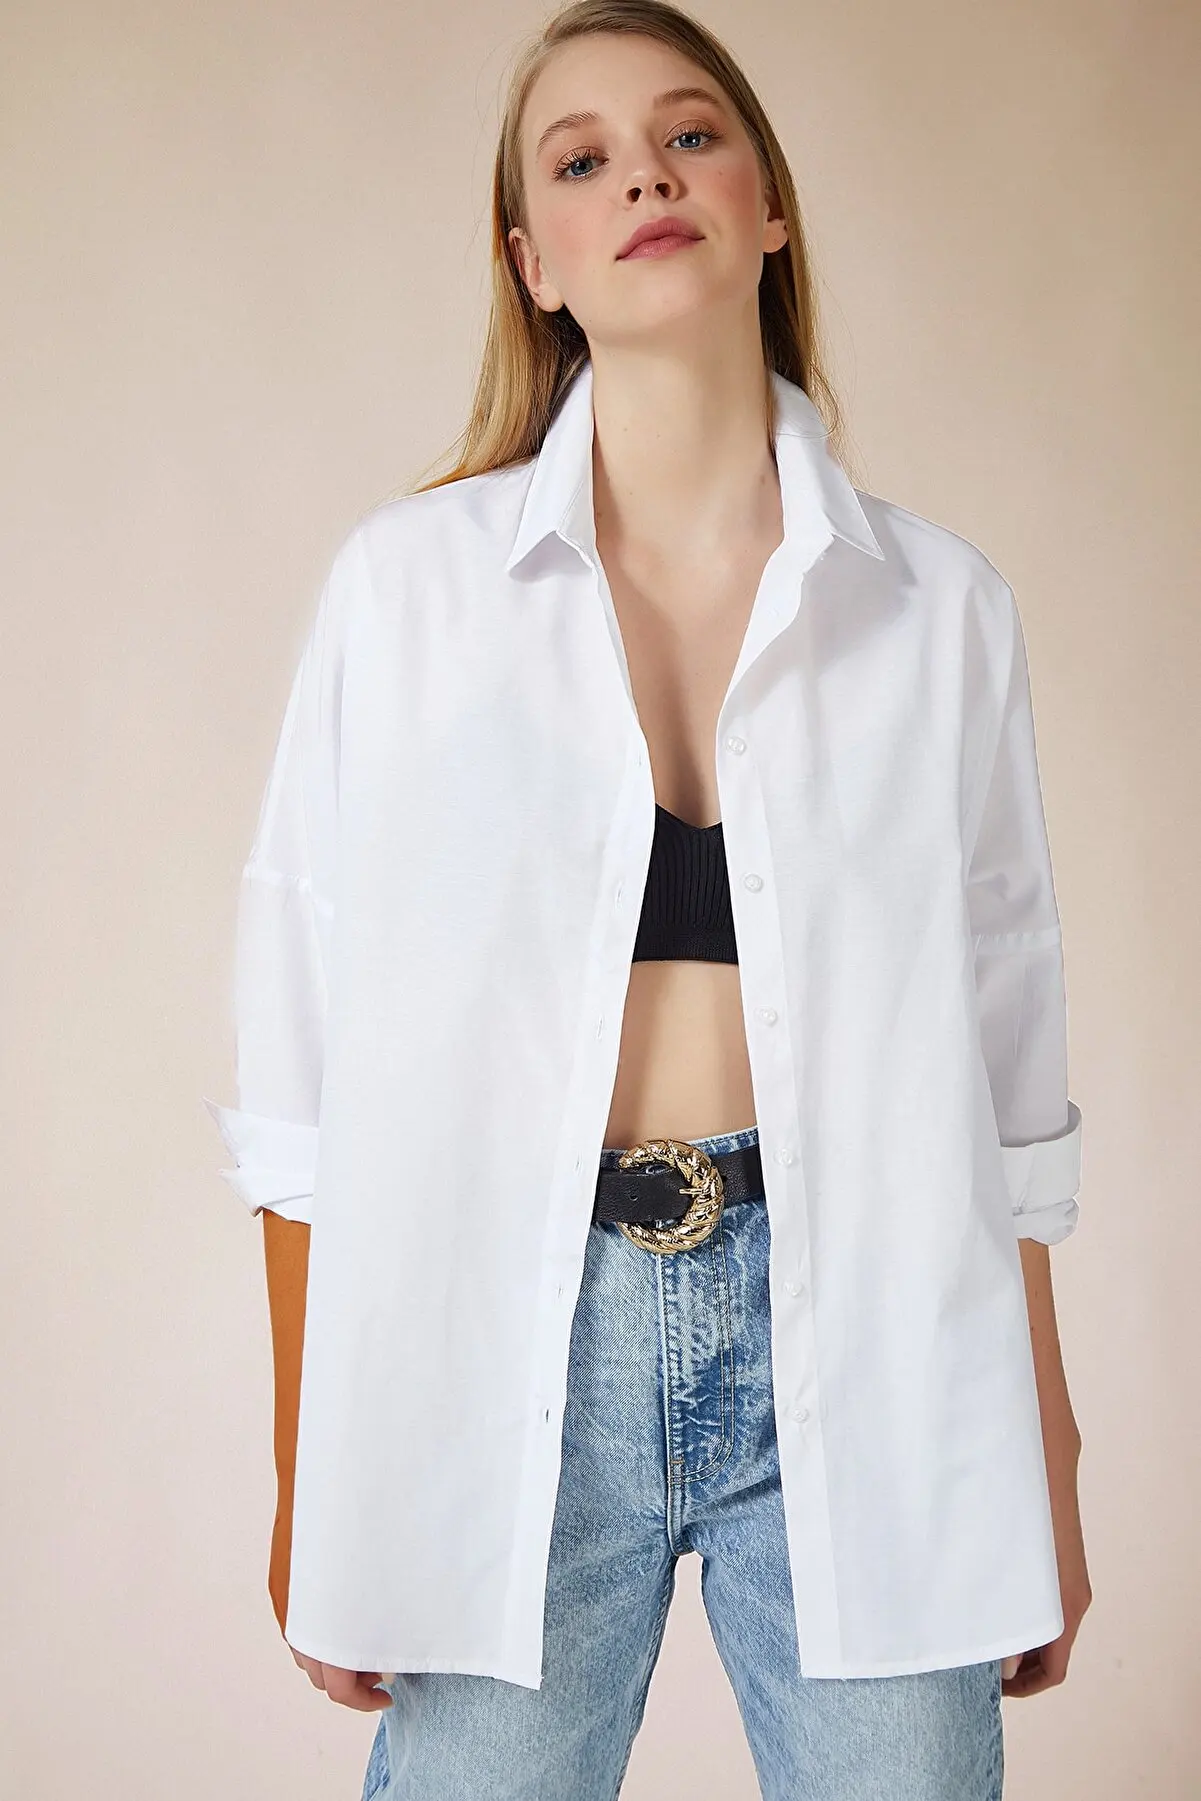 Women's Shirt White Black Blue Oversize Long Basic New Blouse Spring Autumn 2022 Fashion Modern Daily Stylish Casual For Woman black jeans for men cotton stretchy skinny jeans high quality hip hop solid color slim oversize denim pencil pants streetwear